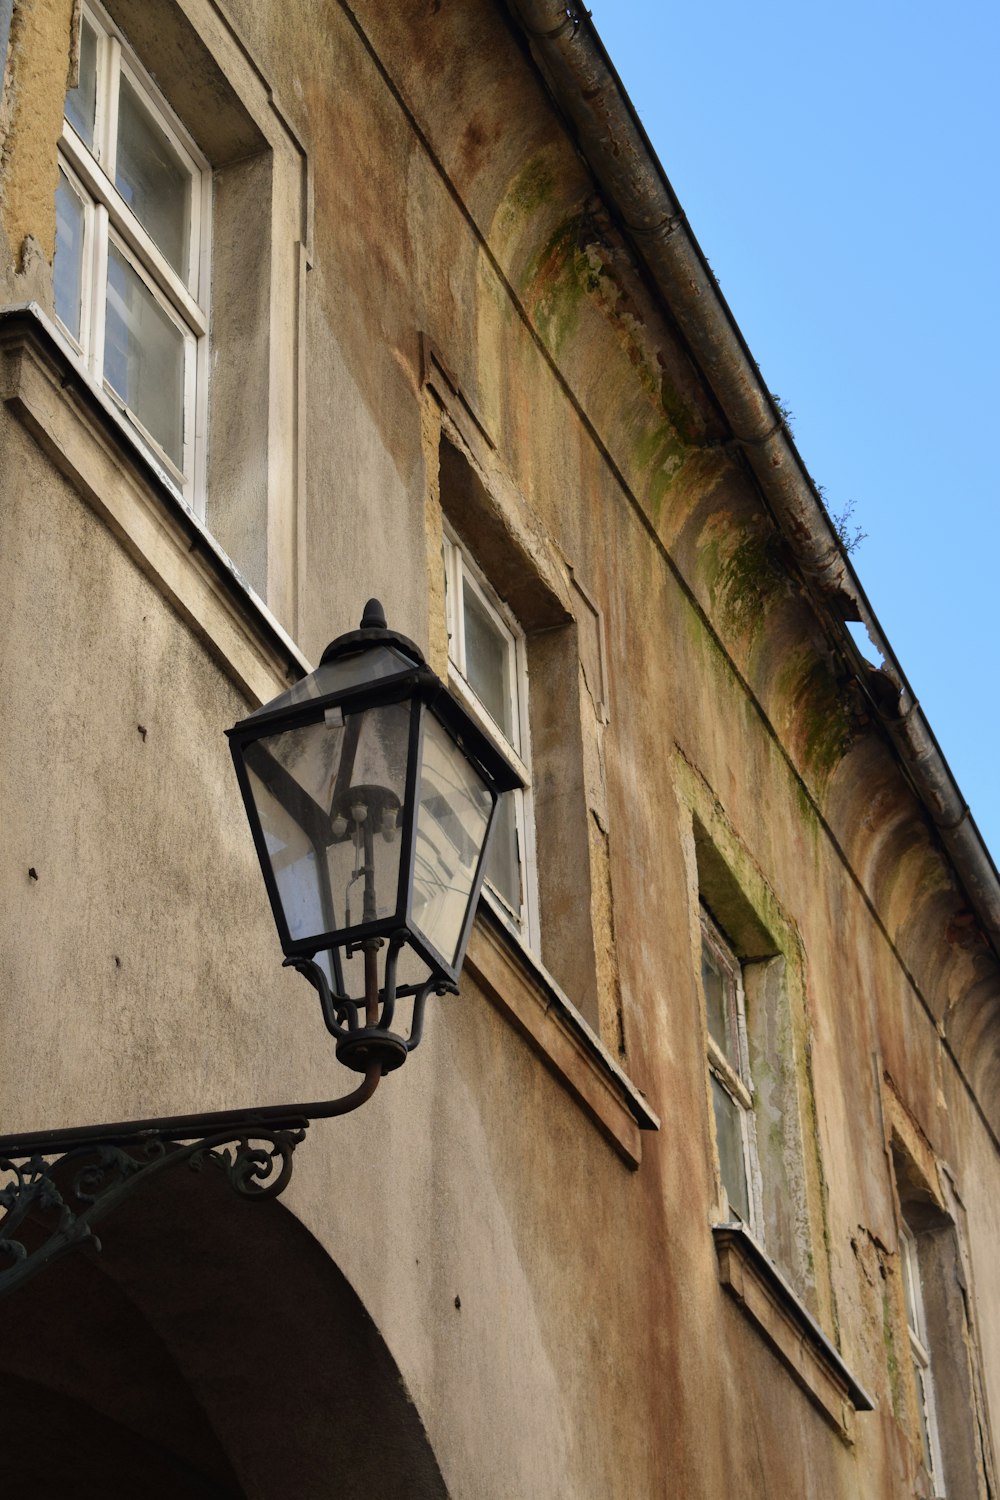 an old fashioned street light on the side of a building